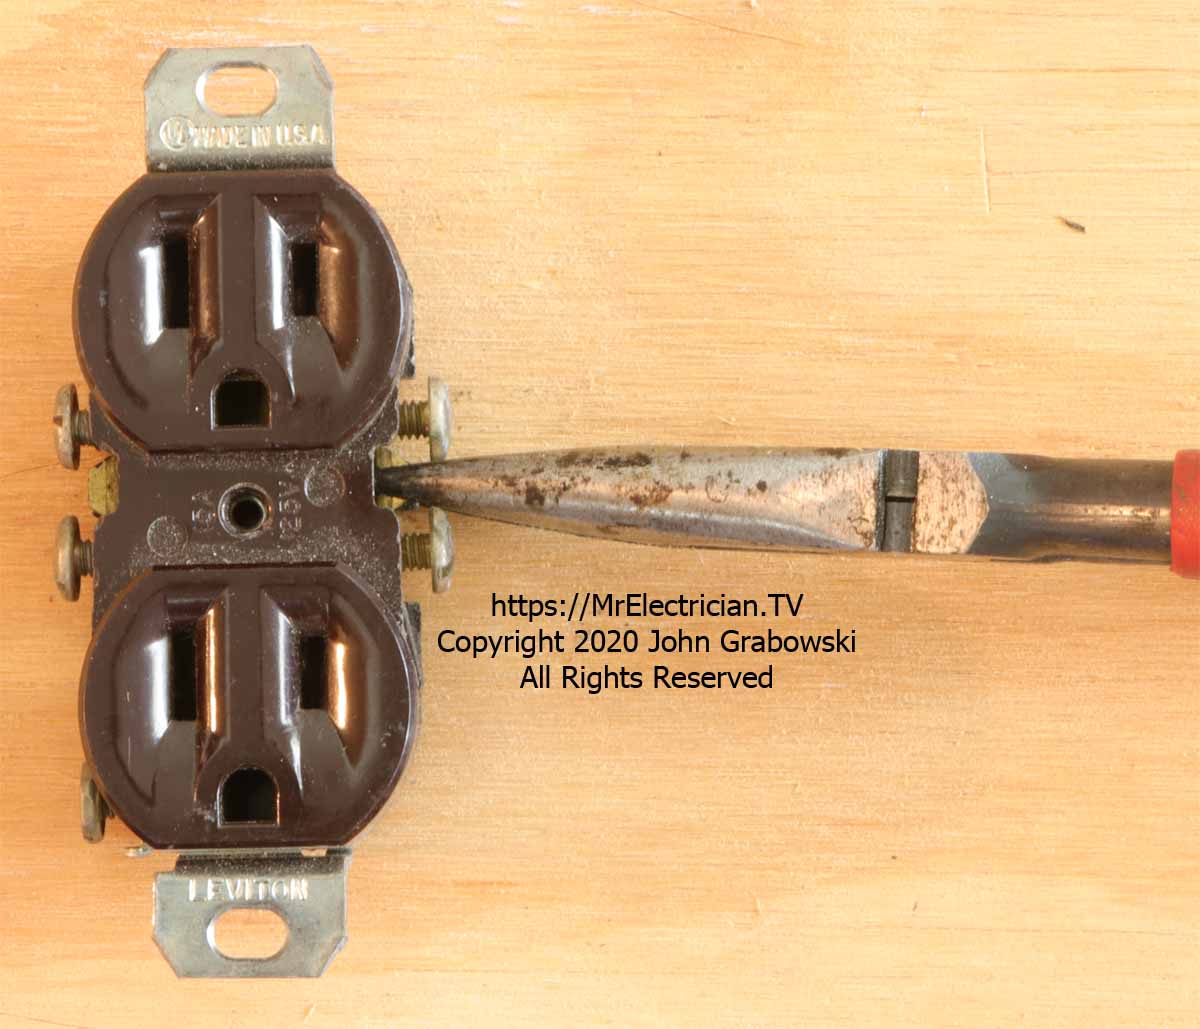 A duplex electrical receptacle having its side tab broken off by needle nose pliers